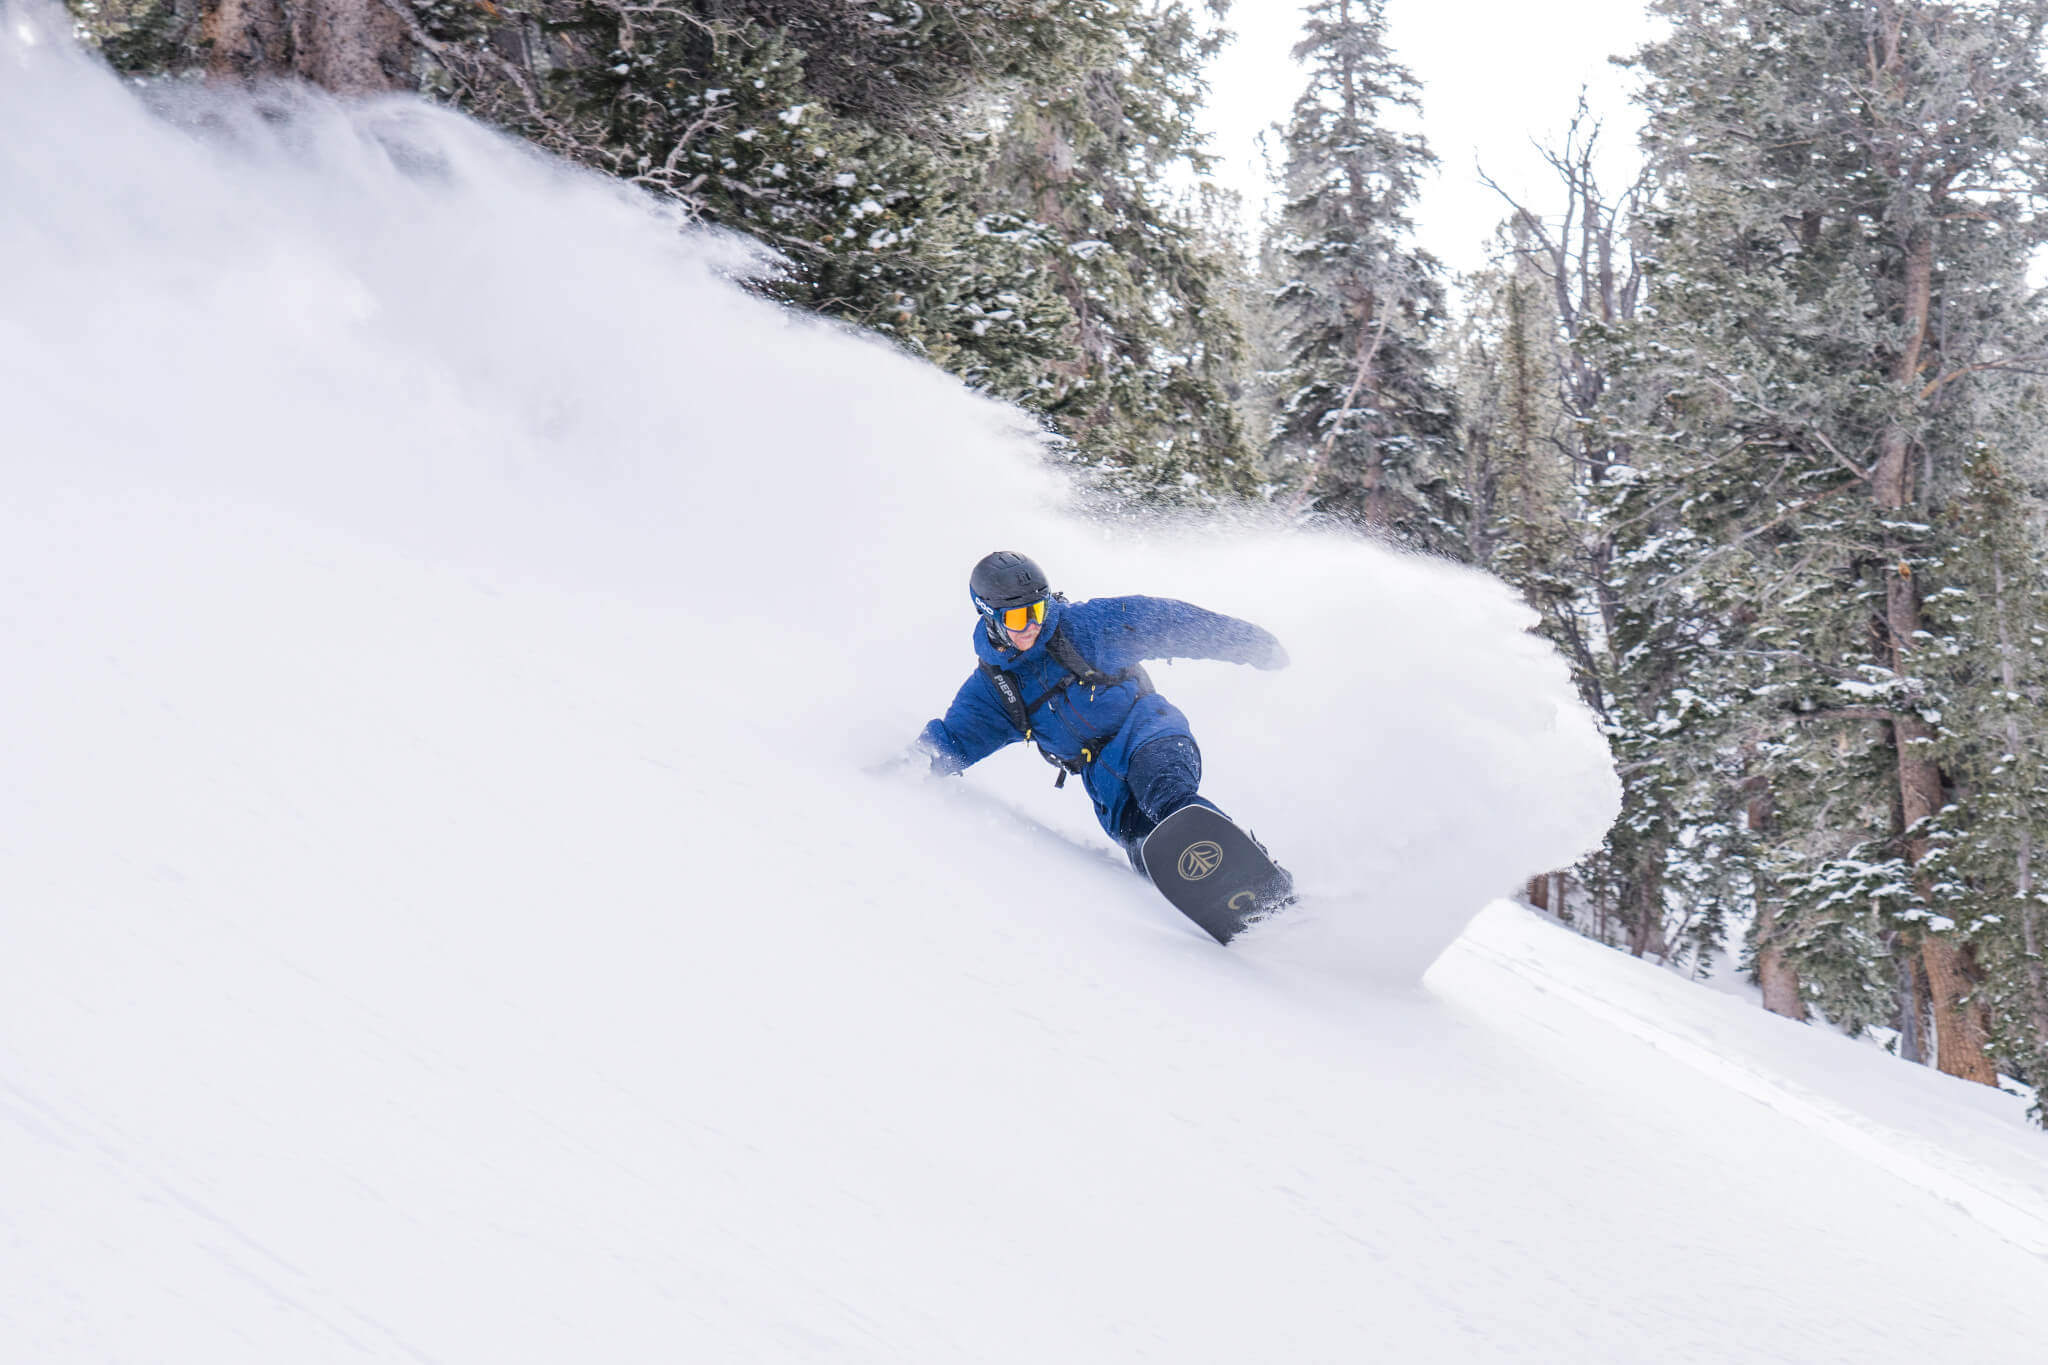 Powder Preview: Get Stoked for the 20/21 Season